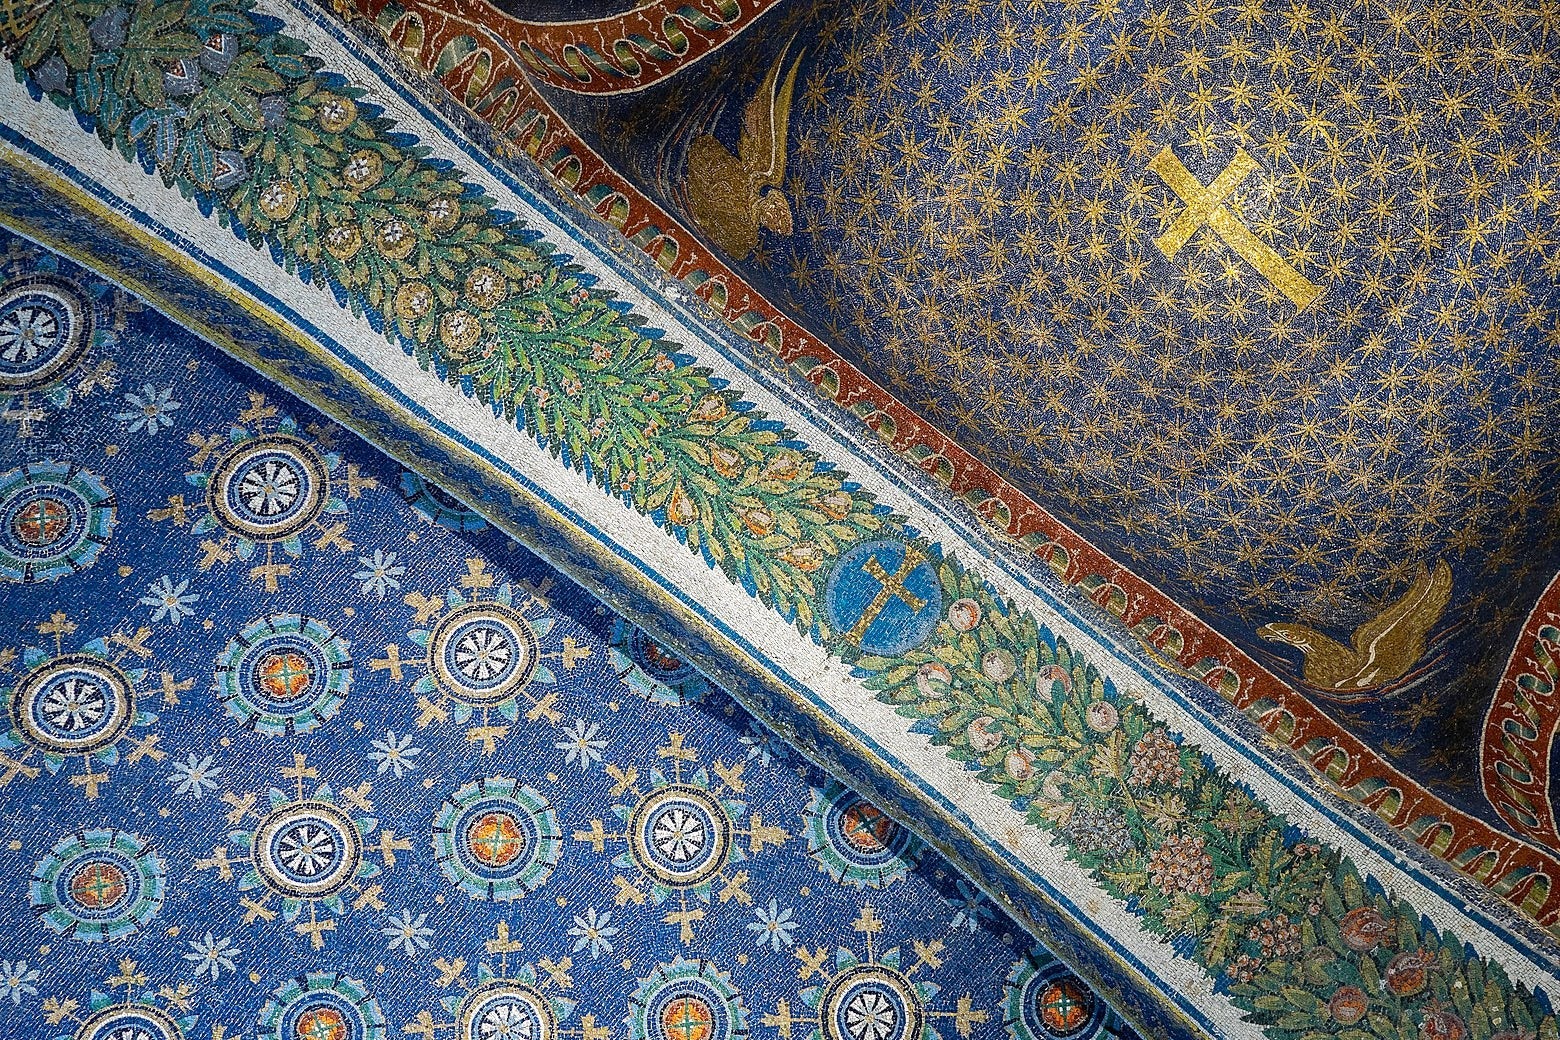 A mosaic ceiling in blue, green, gold, and orange. 